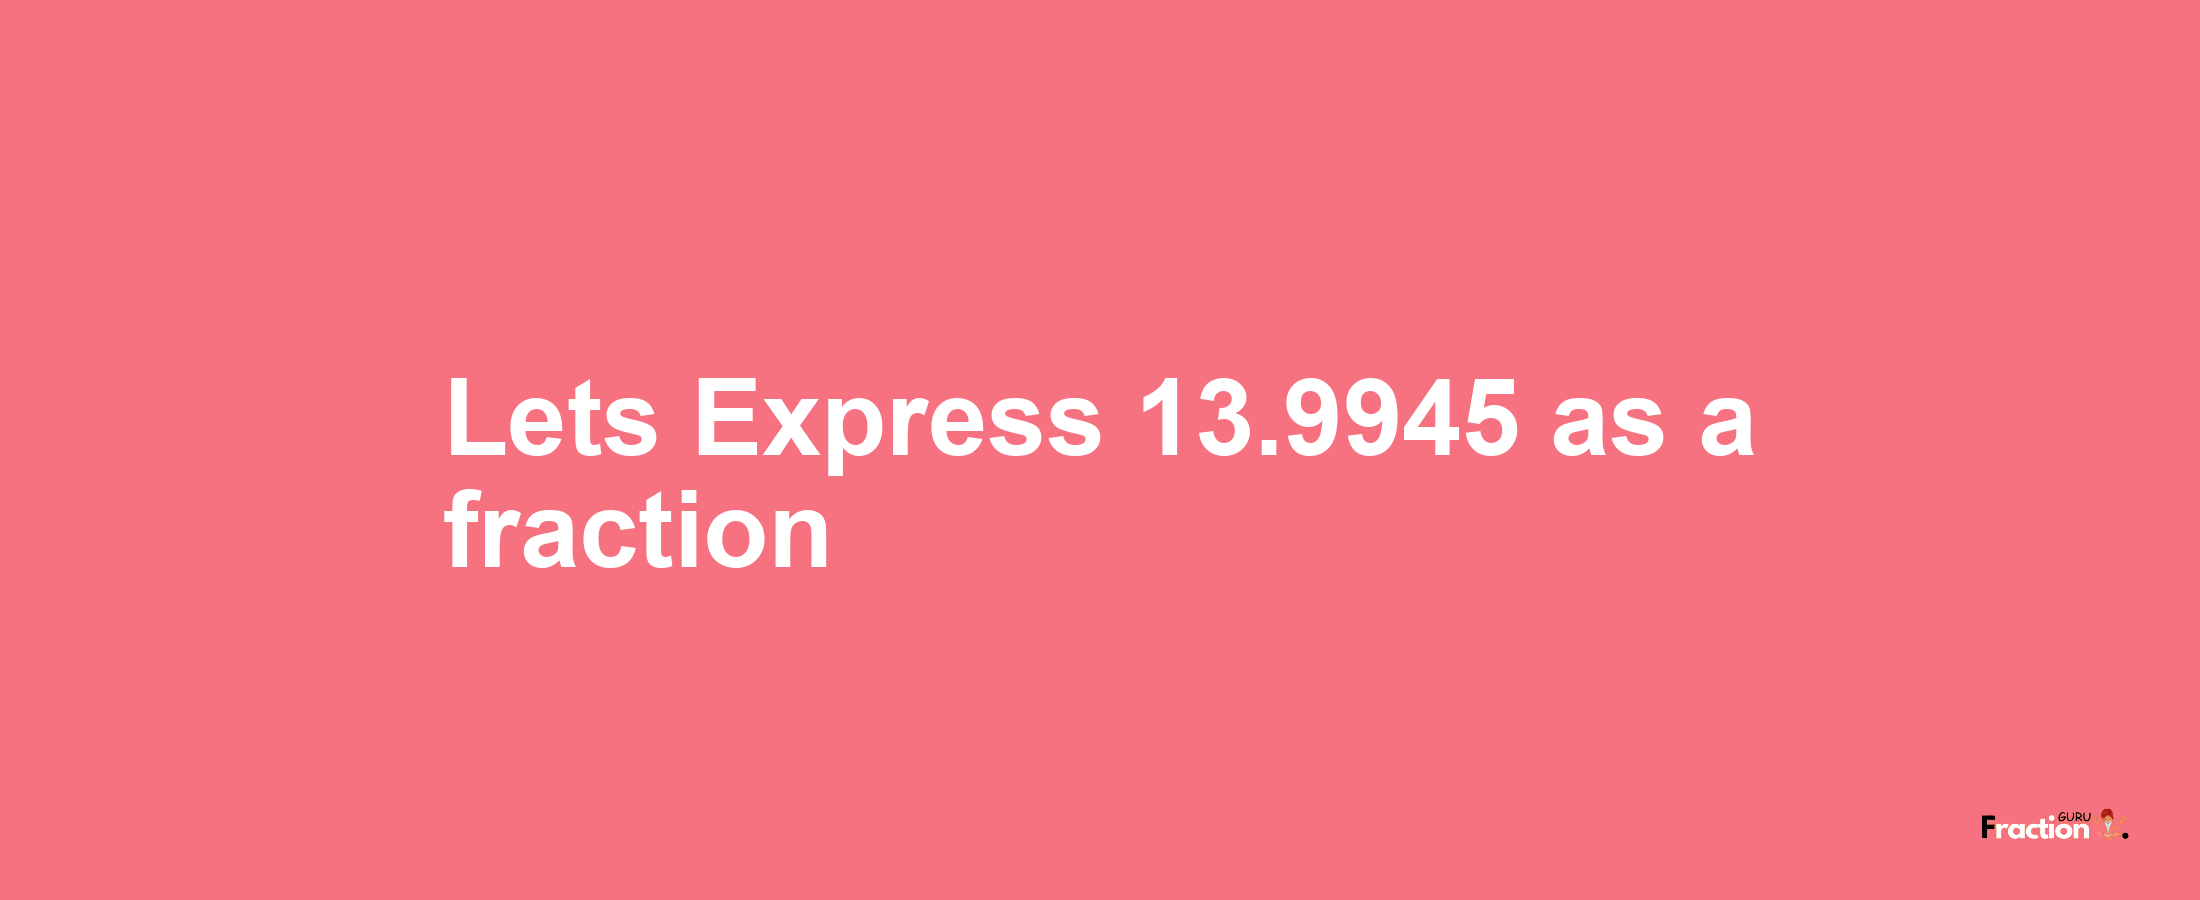 Lets Express 13.9945 as afraction